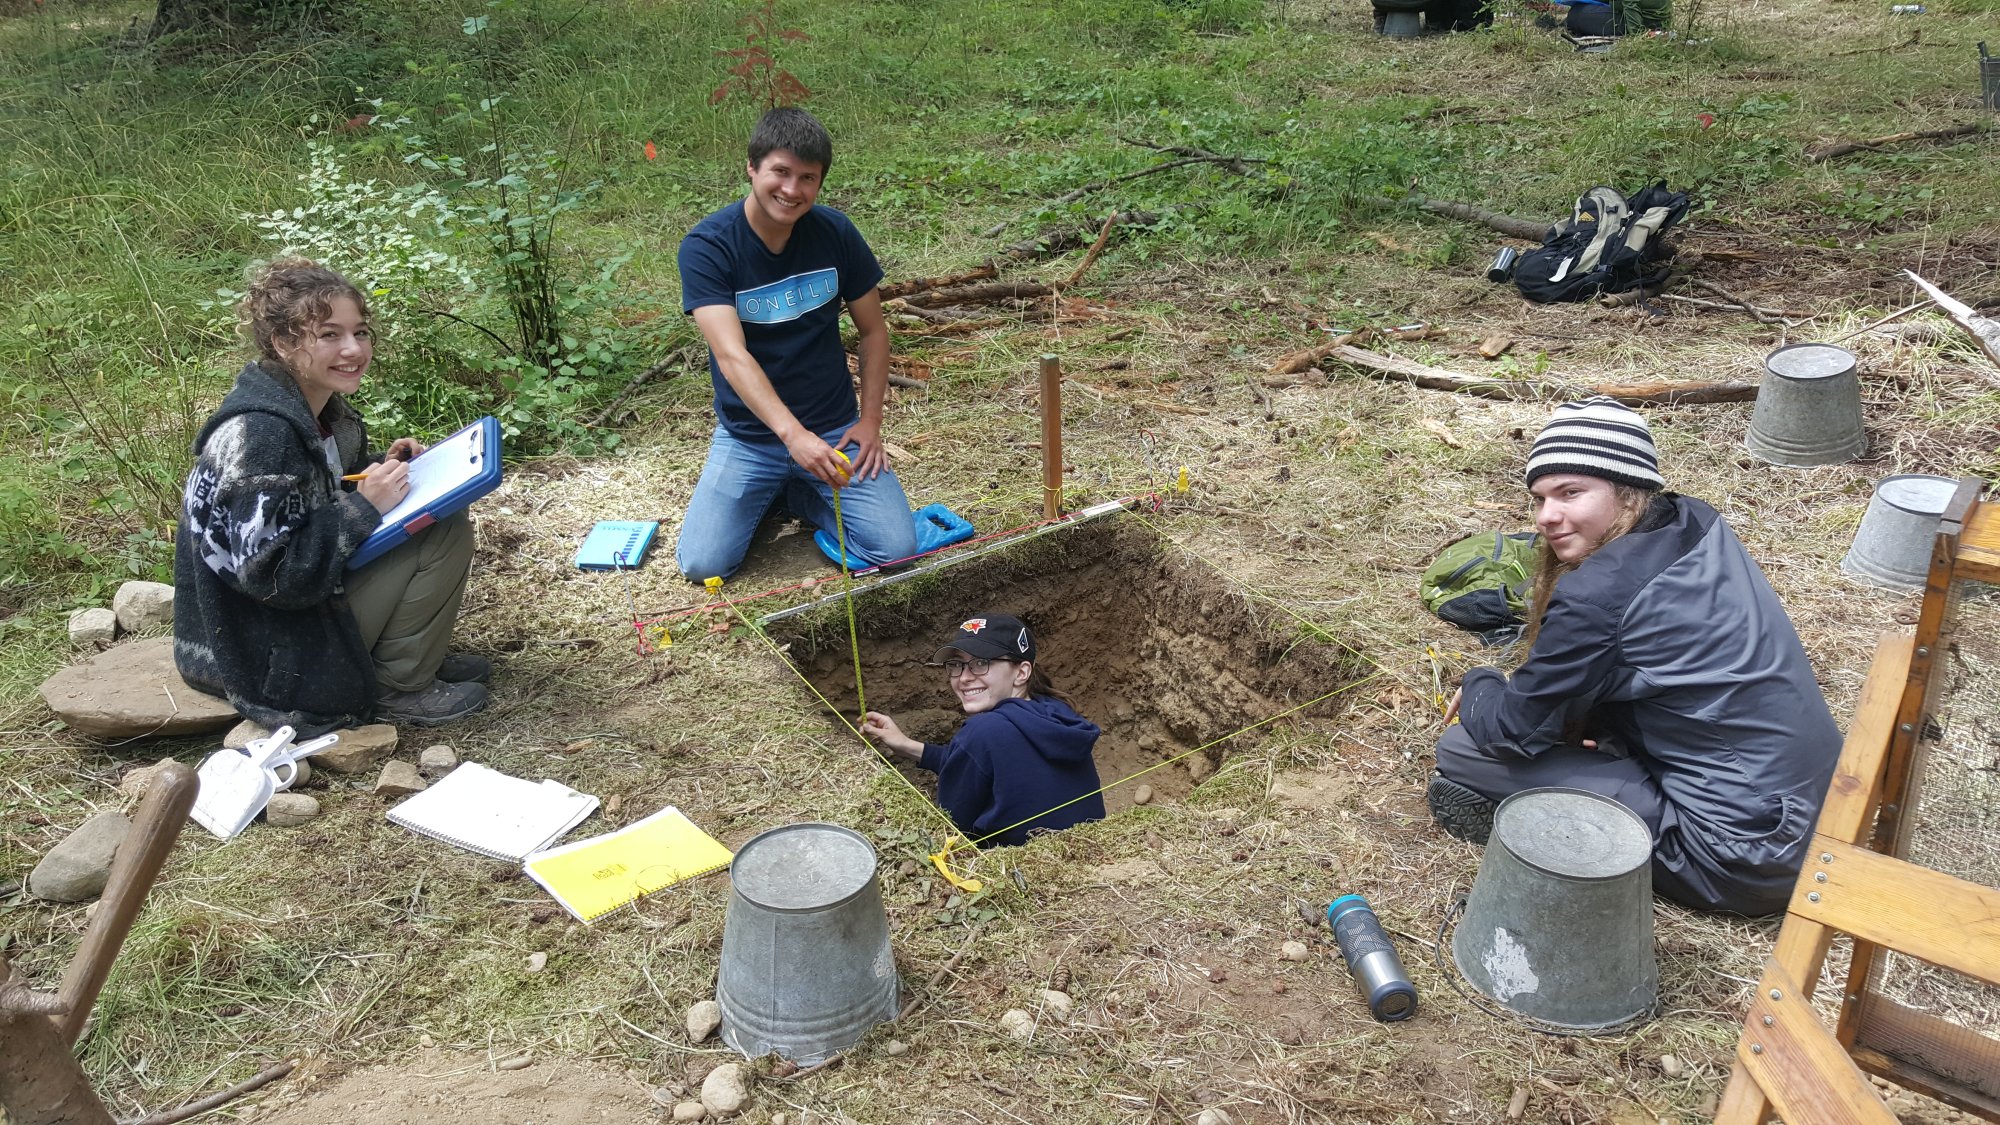 students participating in a dig, sitting near a square hole surrounded by tools